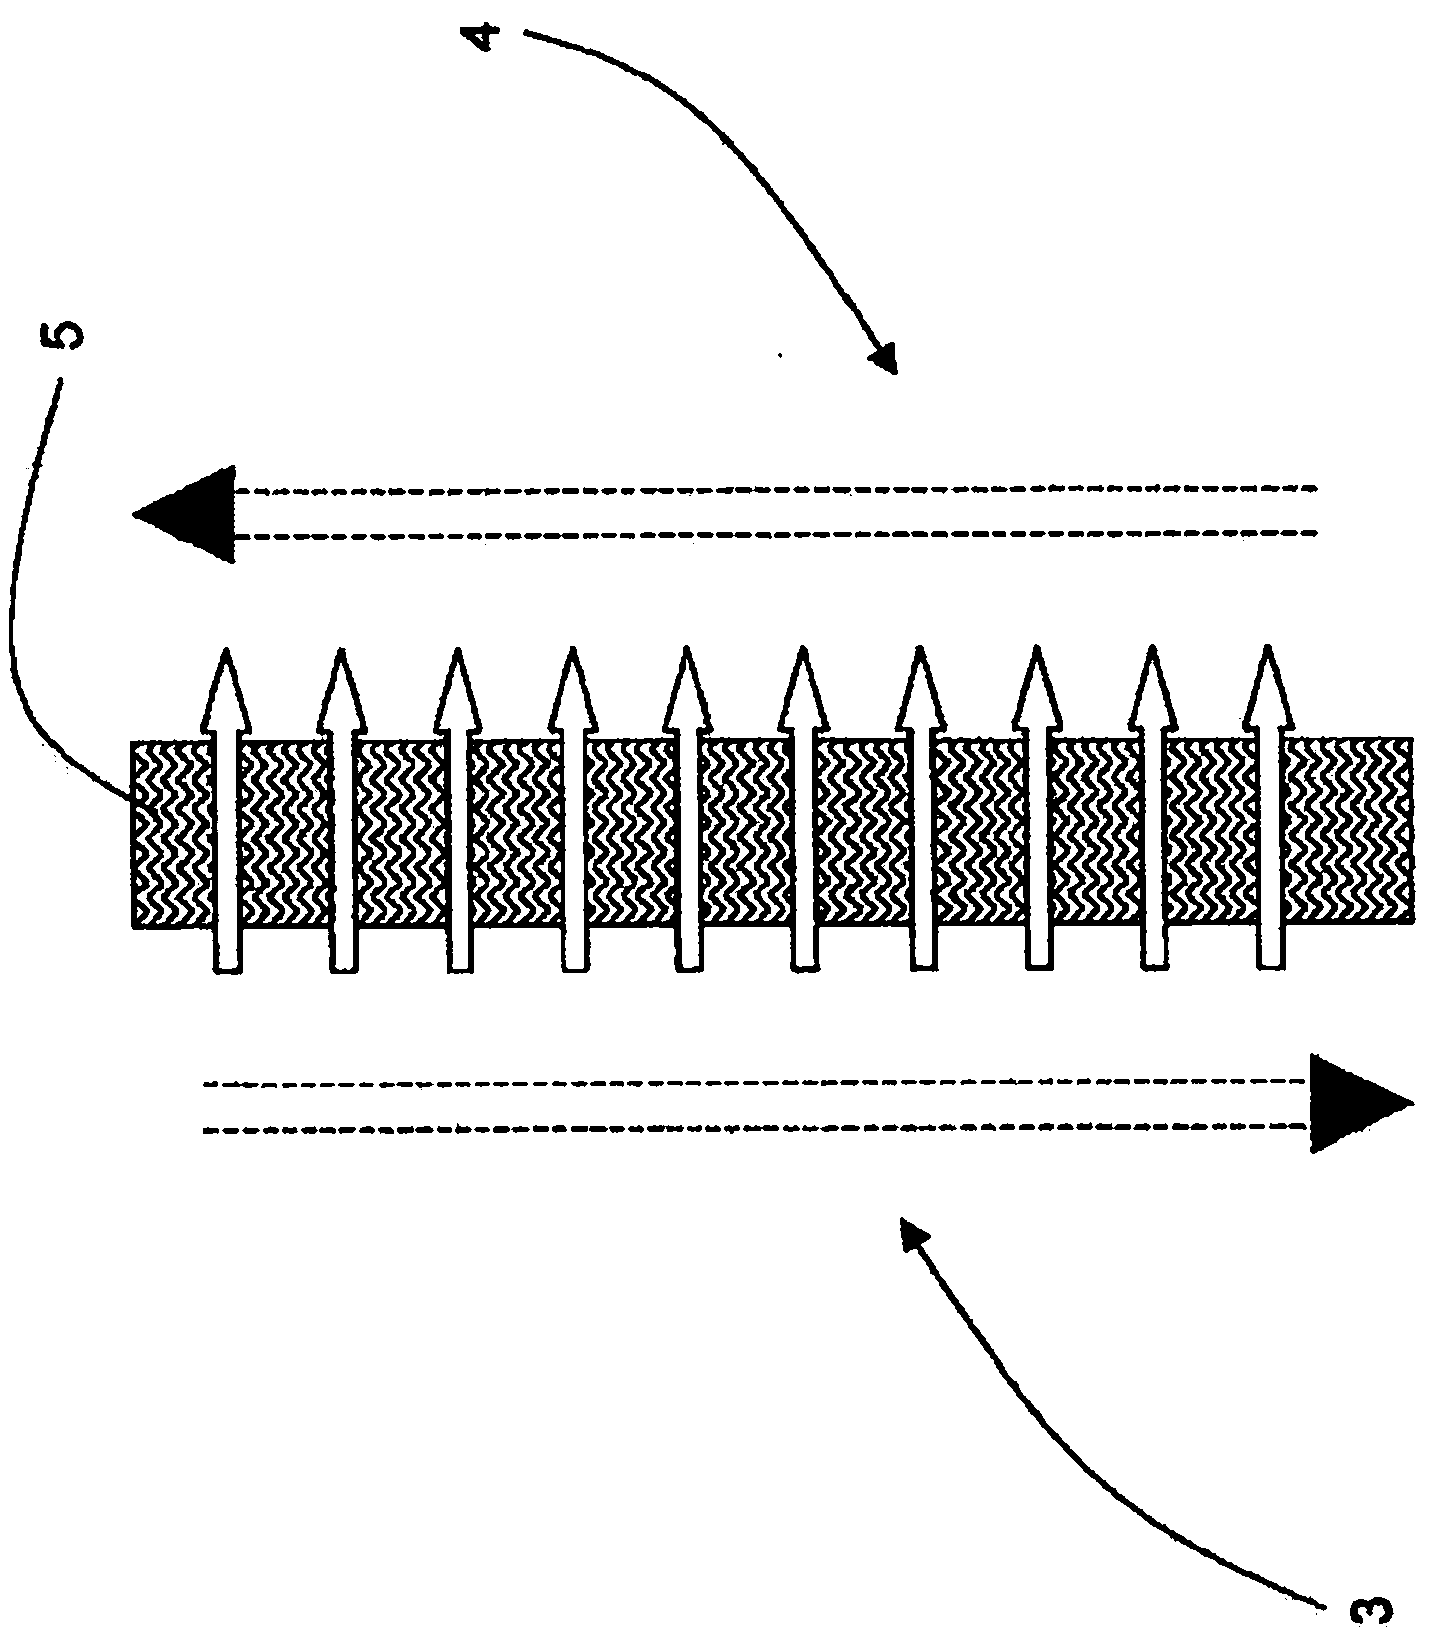 Apparatus and method for concentrating a fluid